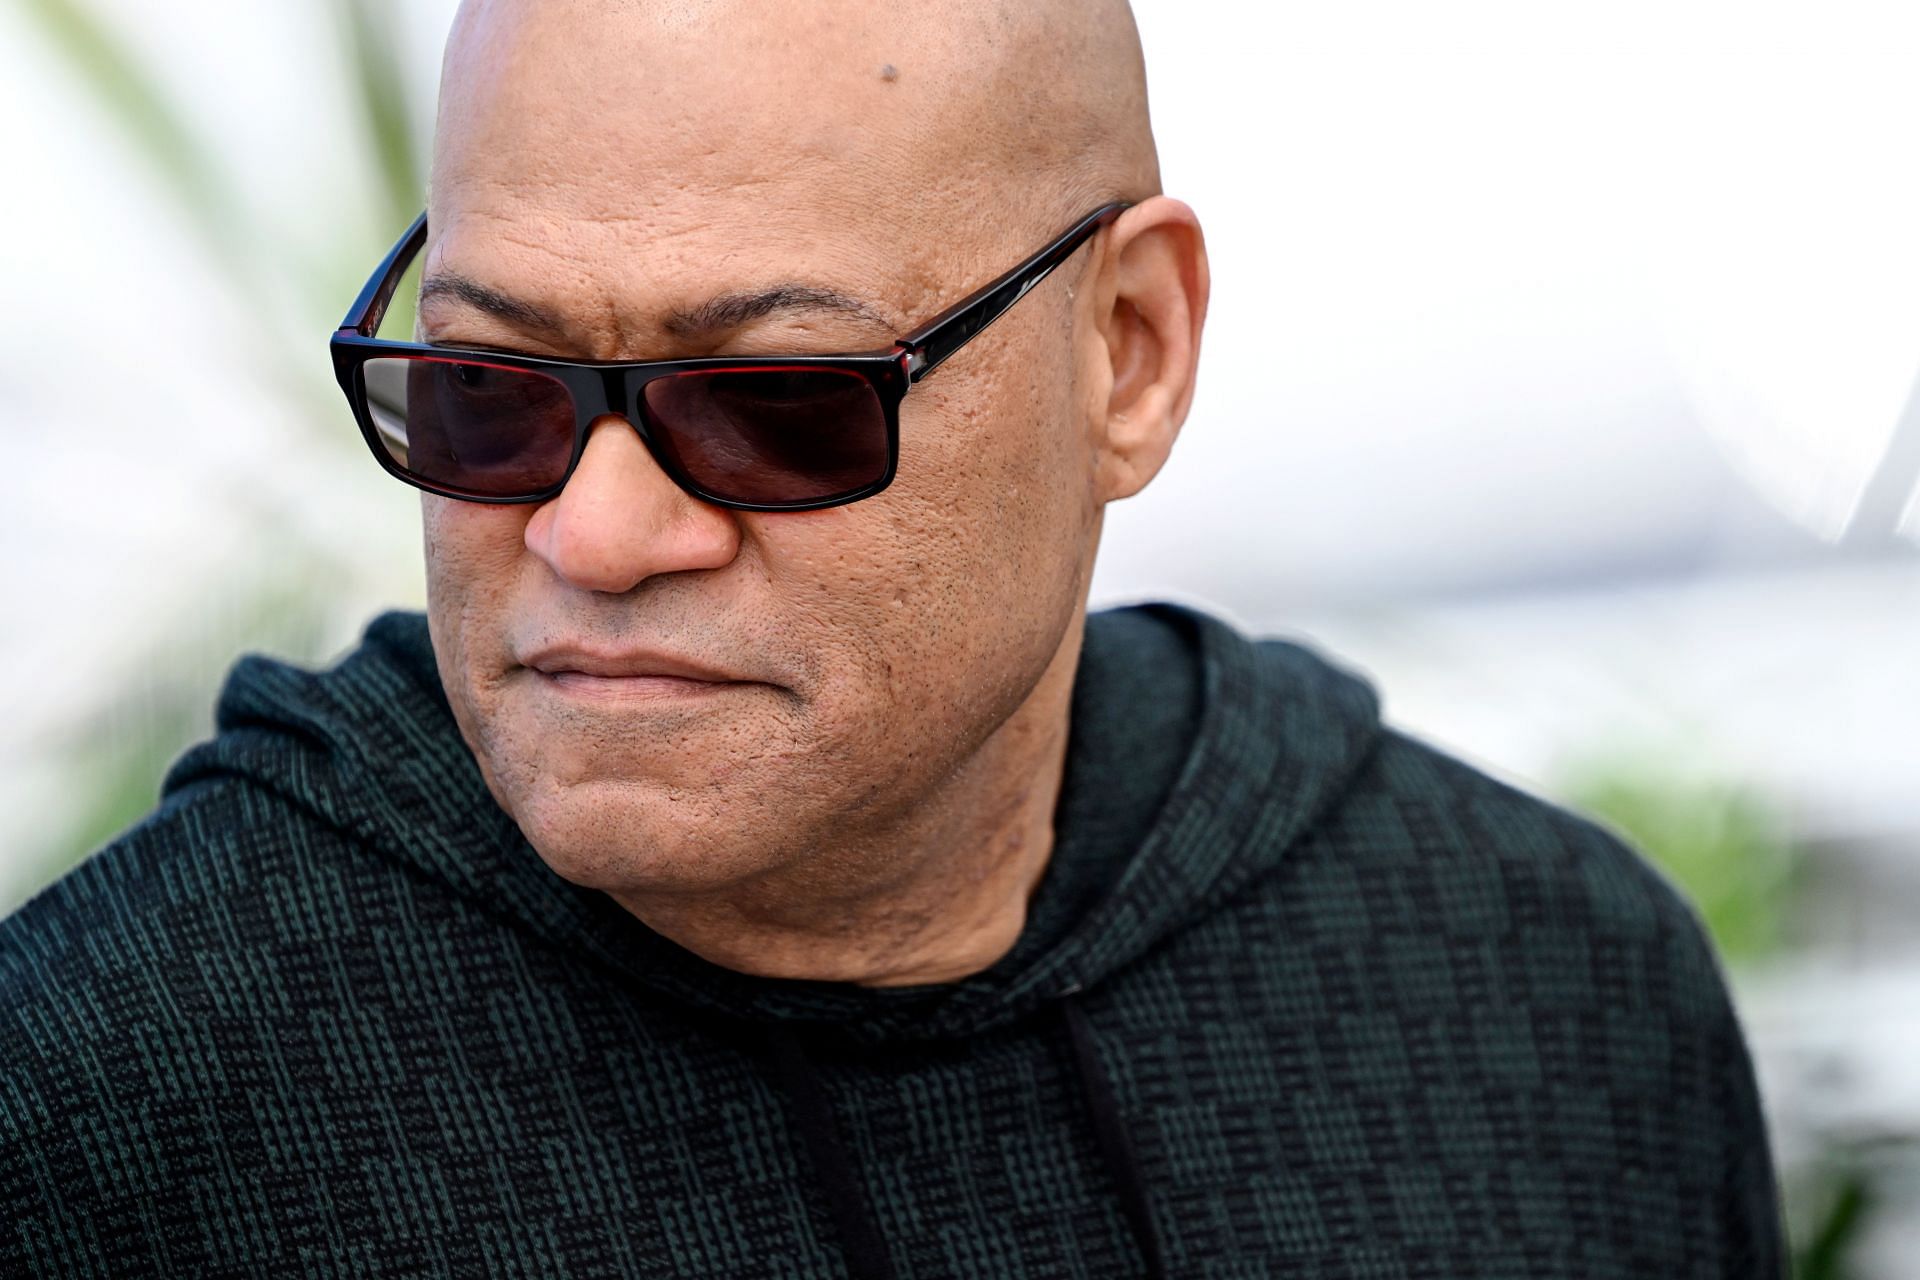 Laurence Fishburne plays Coach Rivers in Clipped episode 3 (Image via Gareth Cattermole/Getty Images)